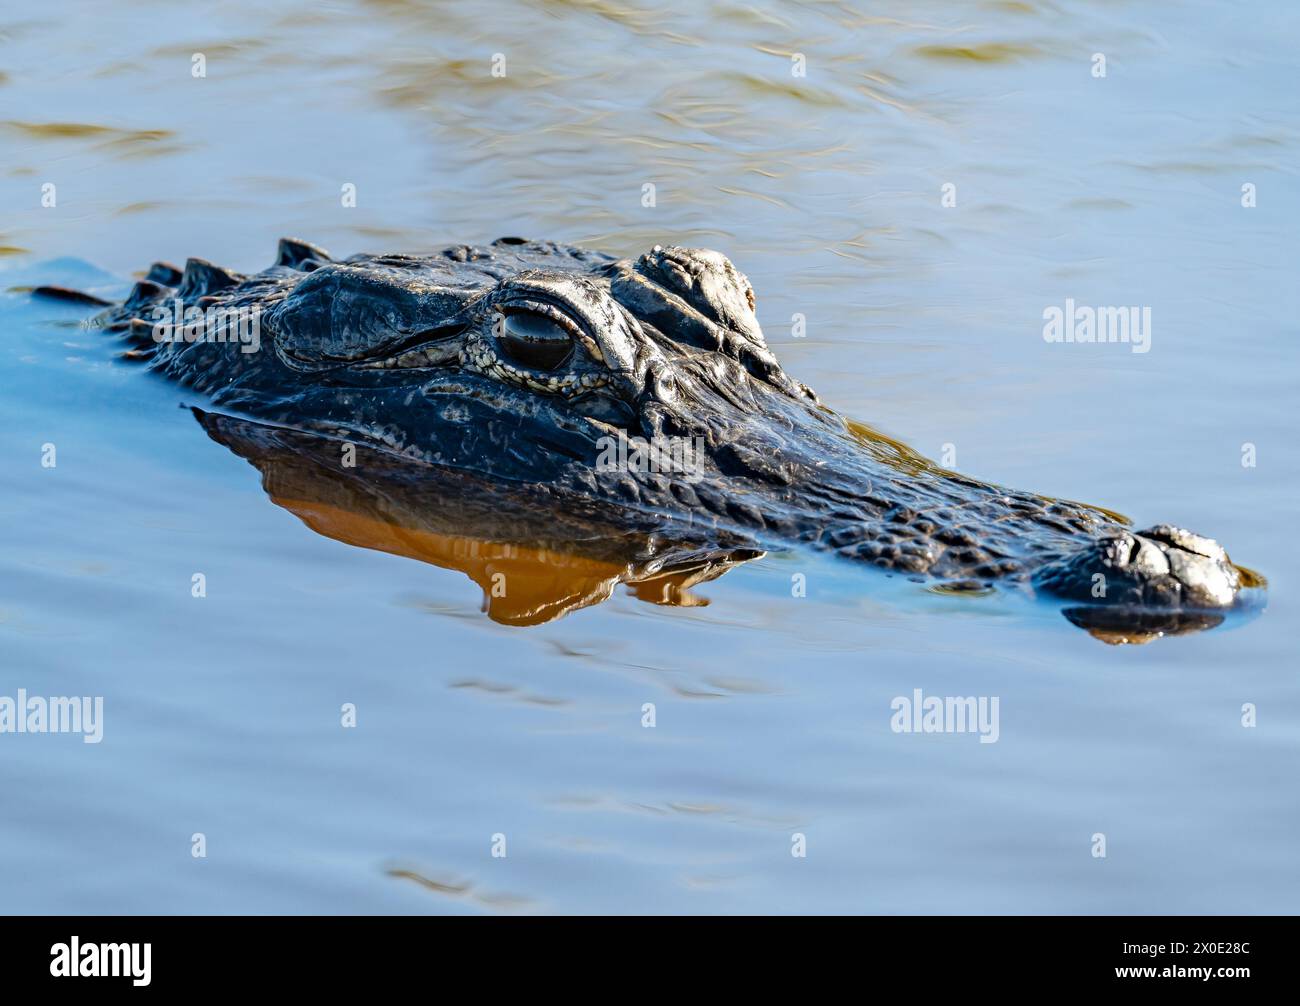 An American Alligator (Alligator mississippiensis) emerged from water. Texas, USA. Stock Photo